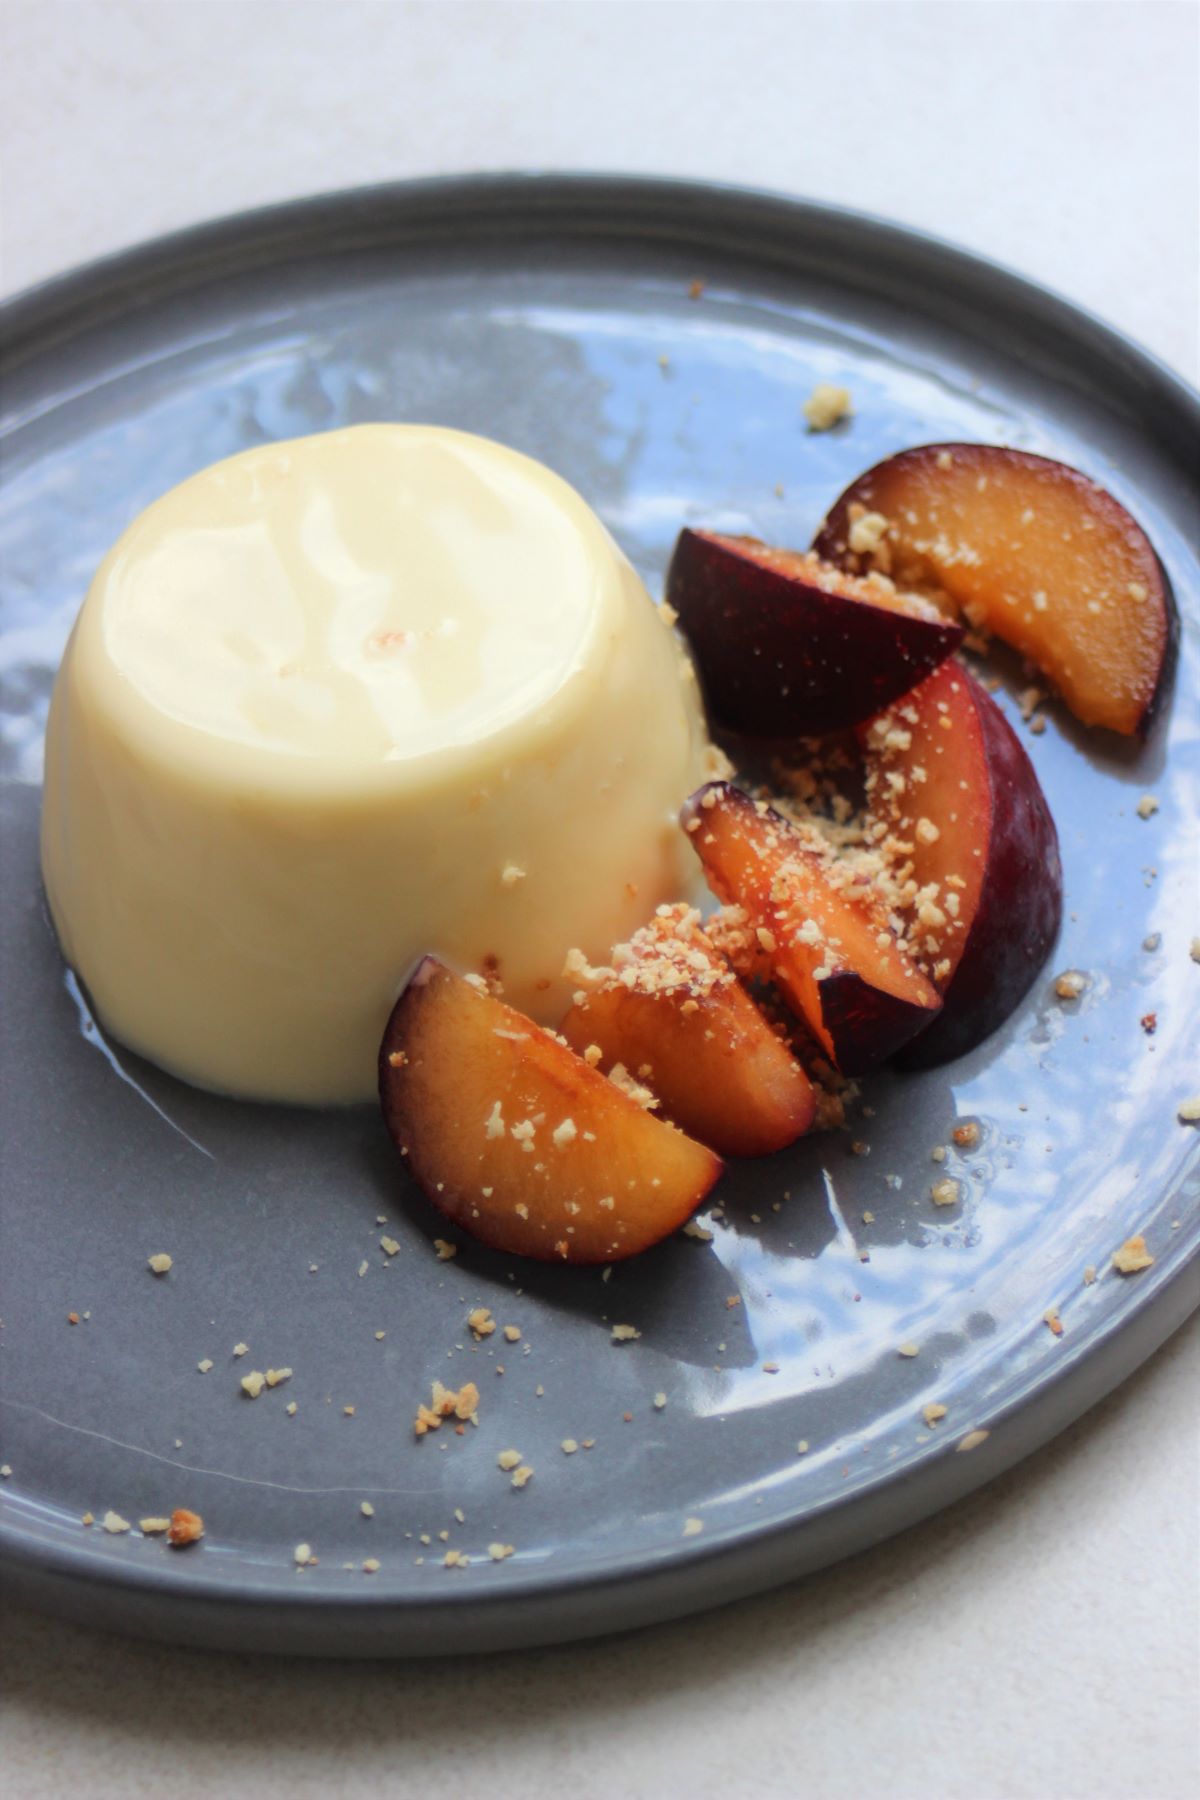 Panna Cotta and slices of plum on a grey plate.